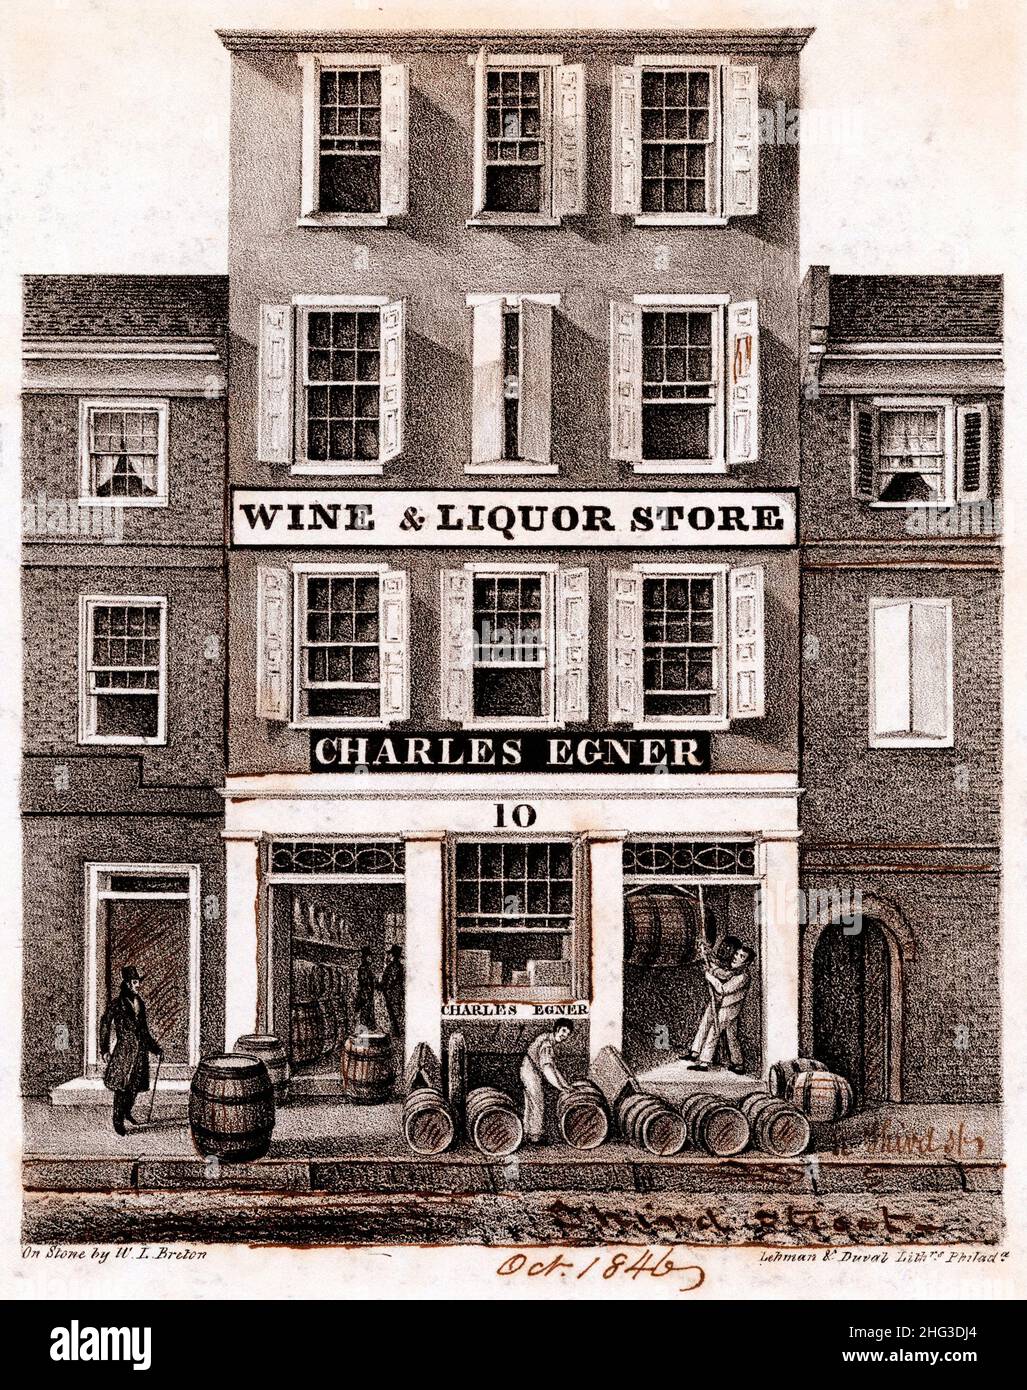 Vintage lithograph of Charles Egner Wine and Liquor Store, 10 North Third Street, Philadelphia. USA. 1825-1855 This lithographed advertisement shows t Stock Photo